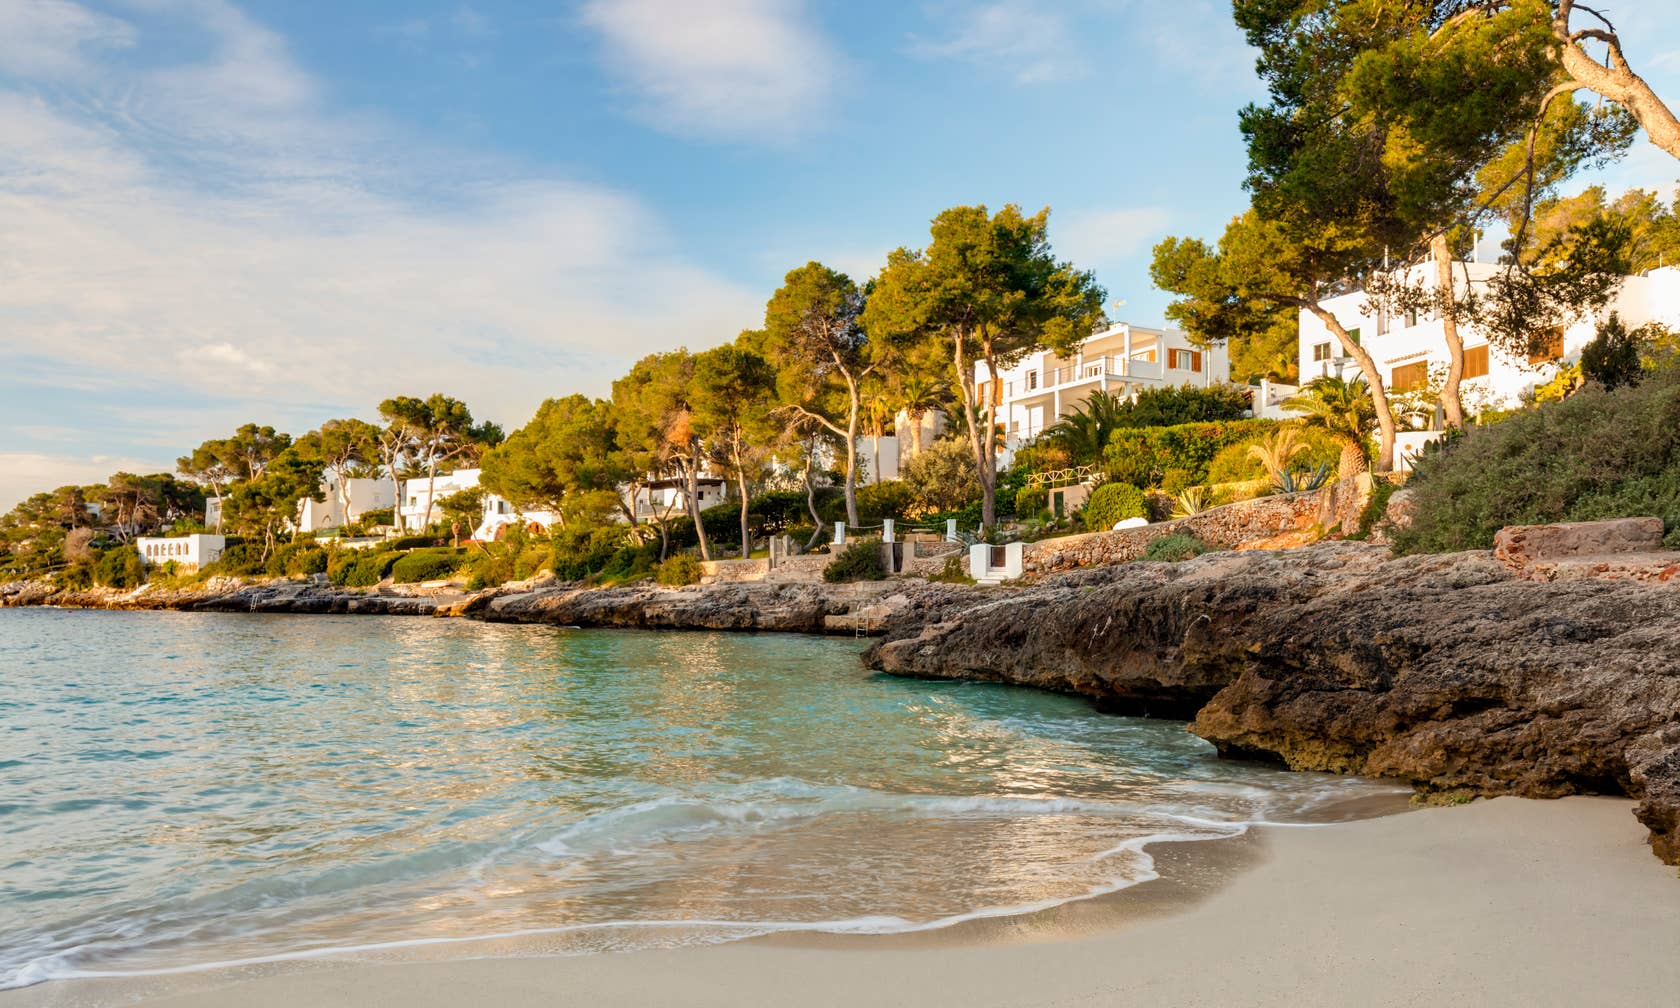 Holiday rentals in Cala d'Or